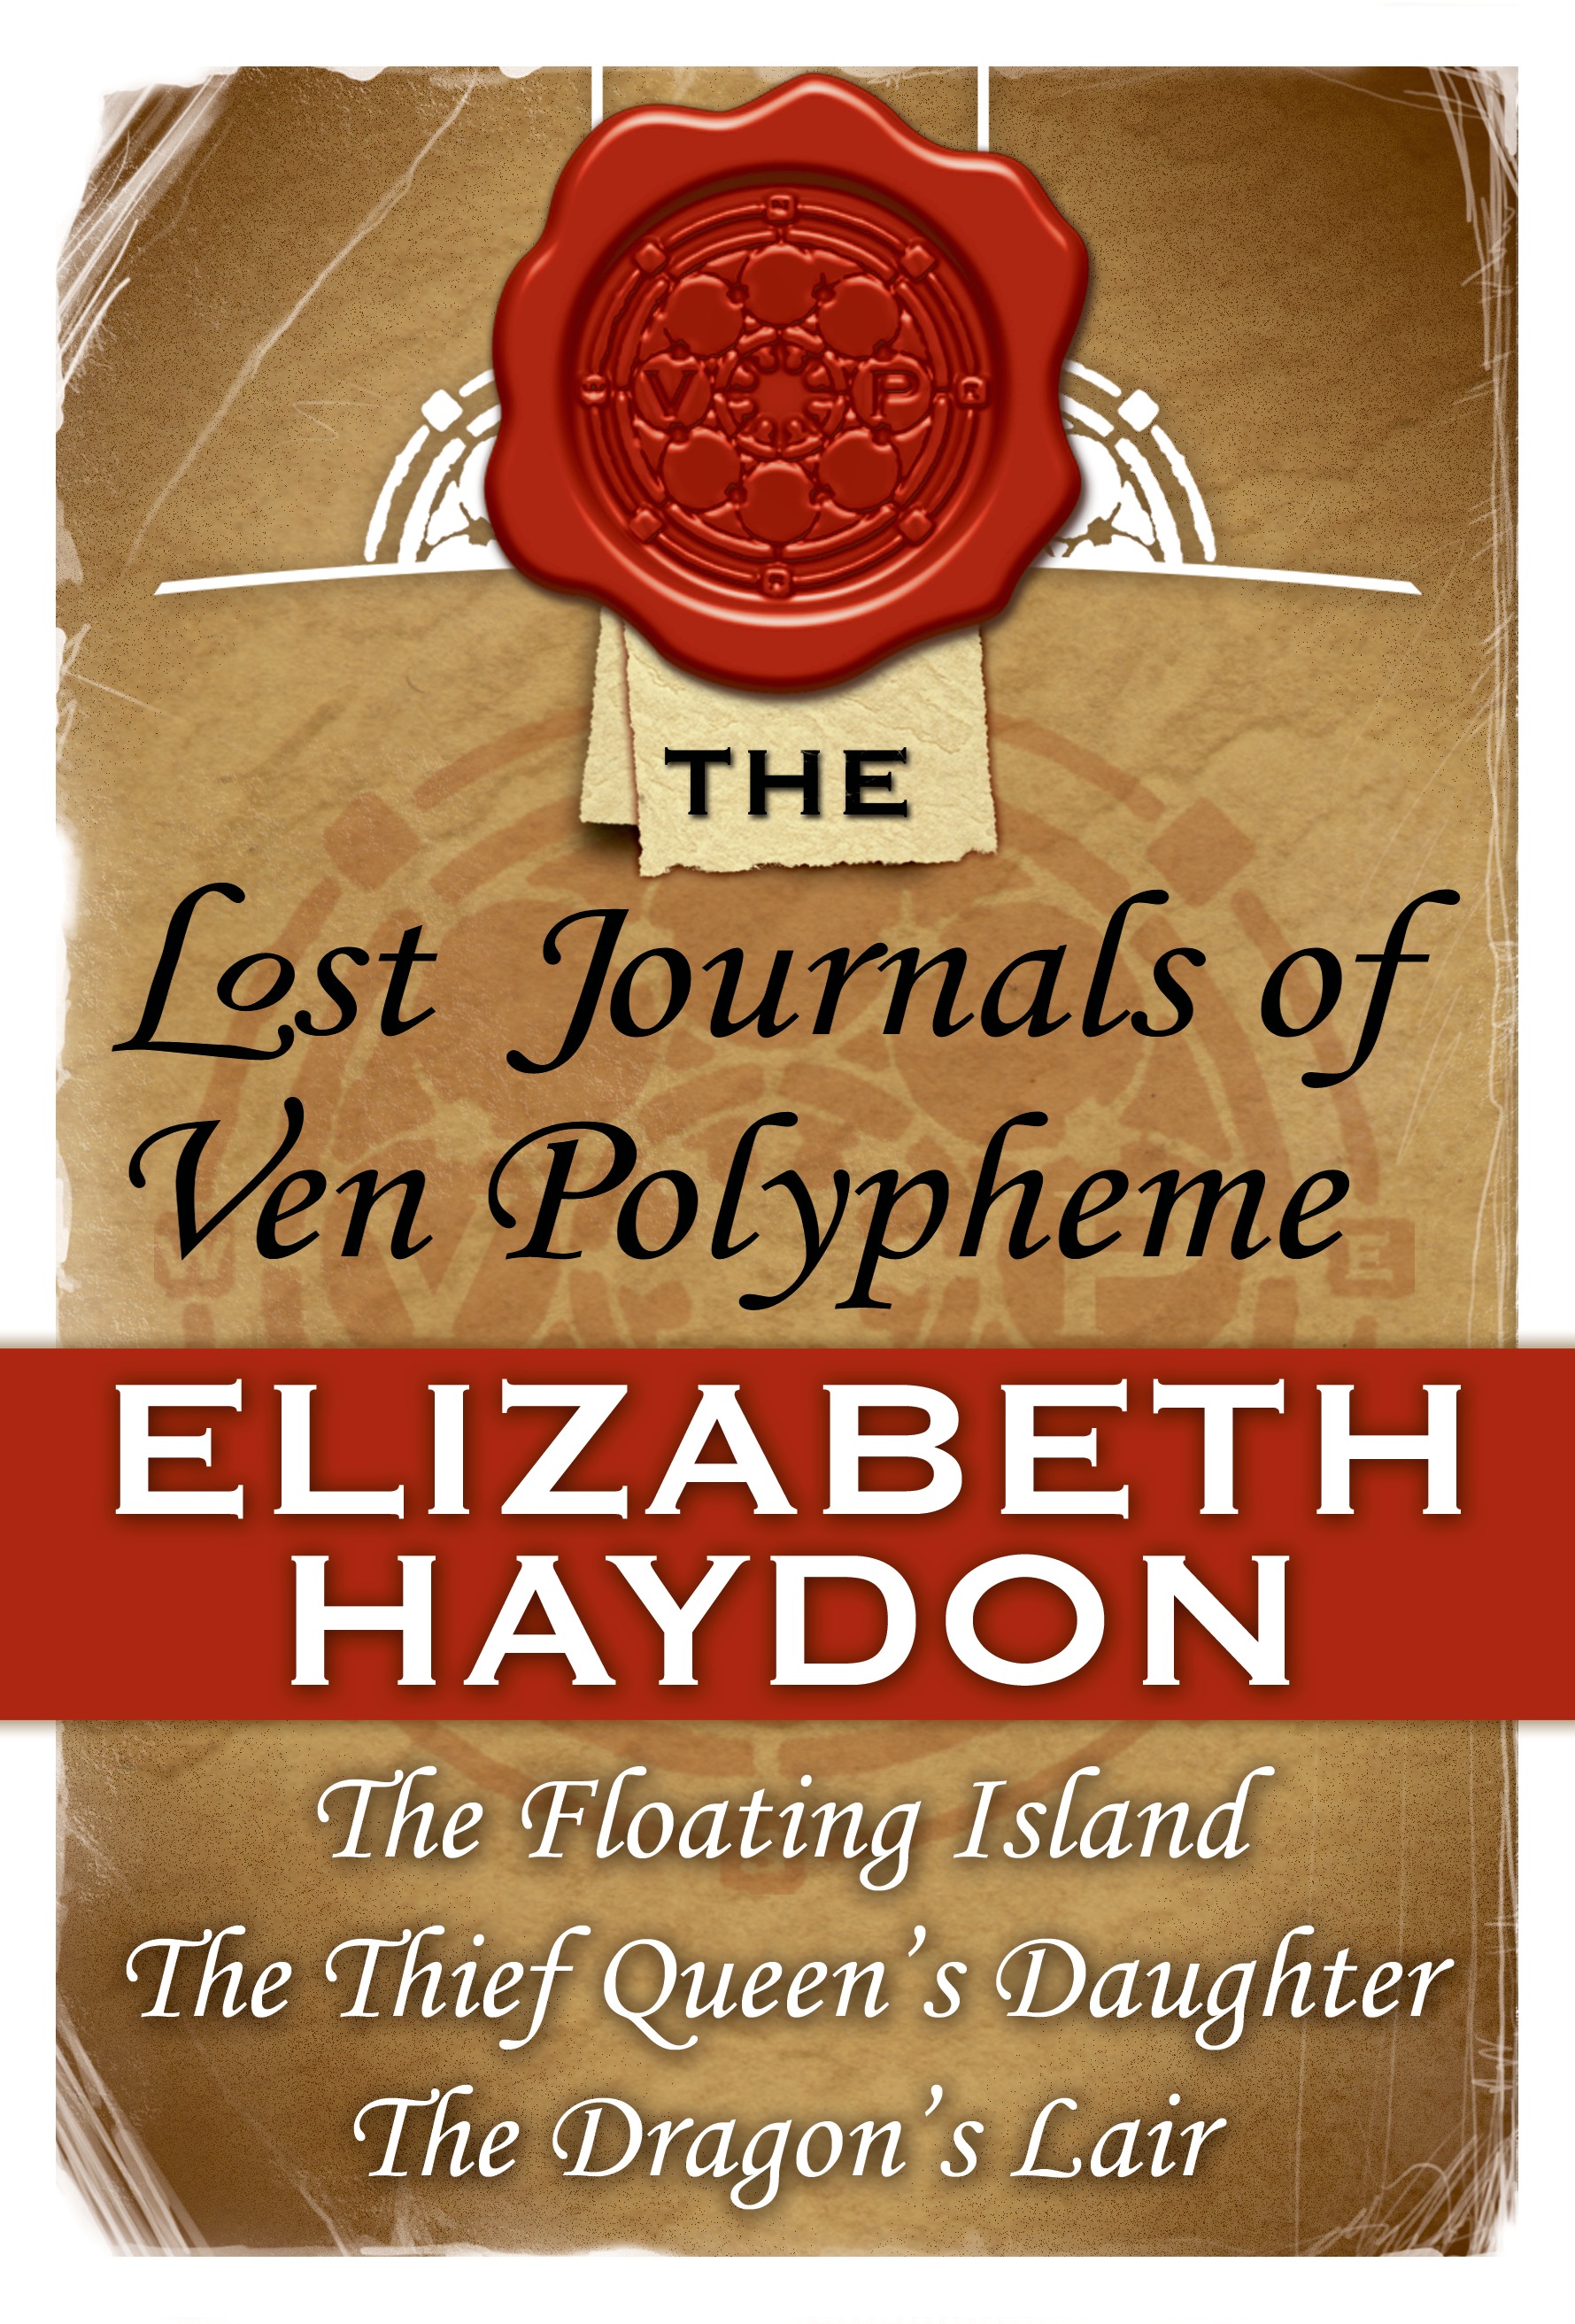 The Lost Journals of Ven Polypheme : The Floating Island, The Thief Queen's Daughter, and The Dragon's Lair by Elizabeth Haydon